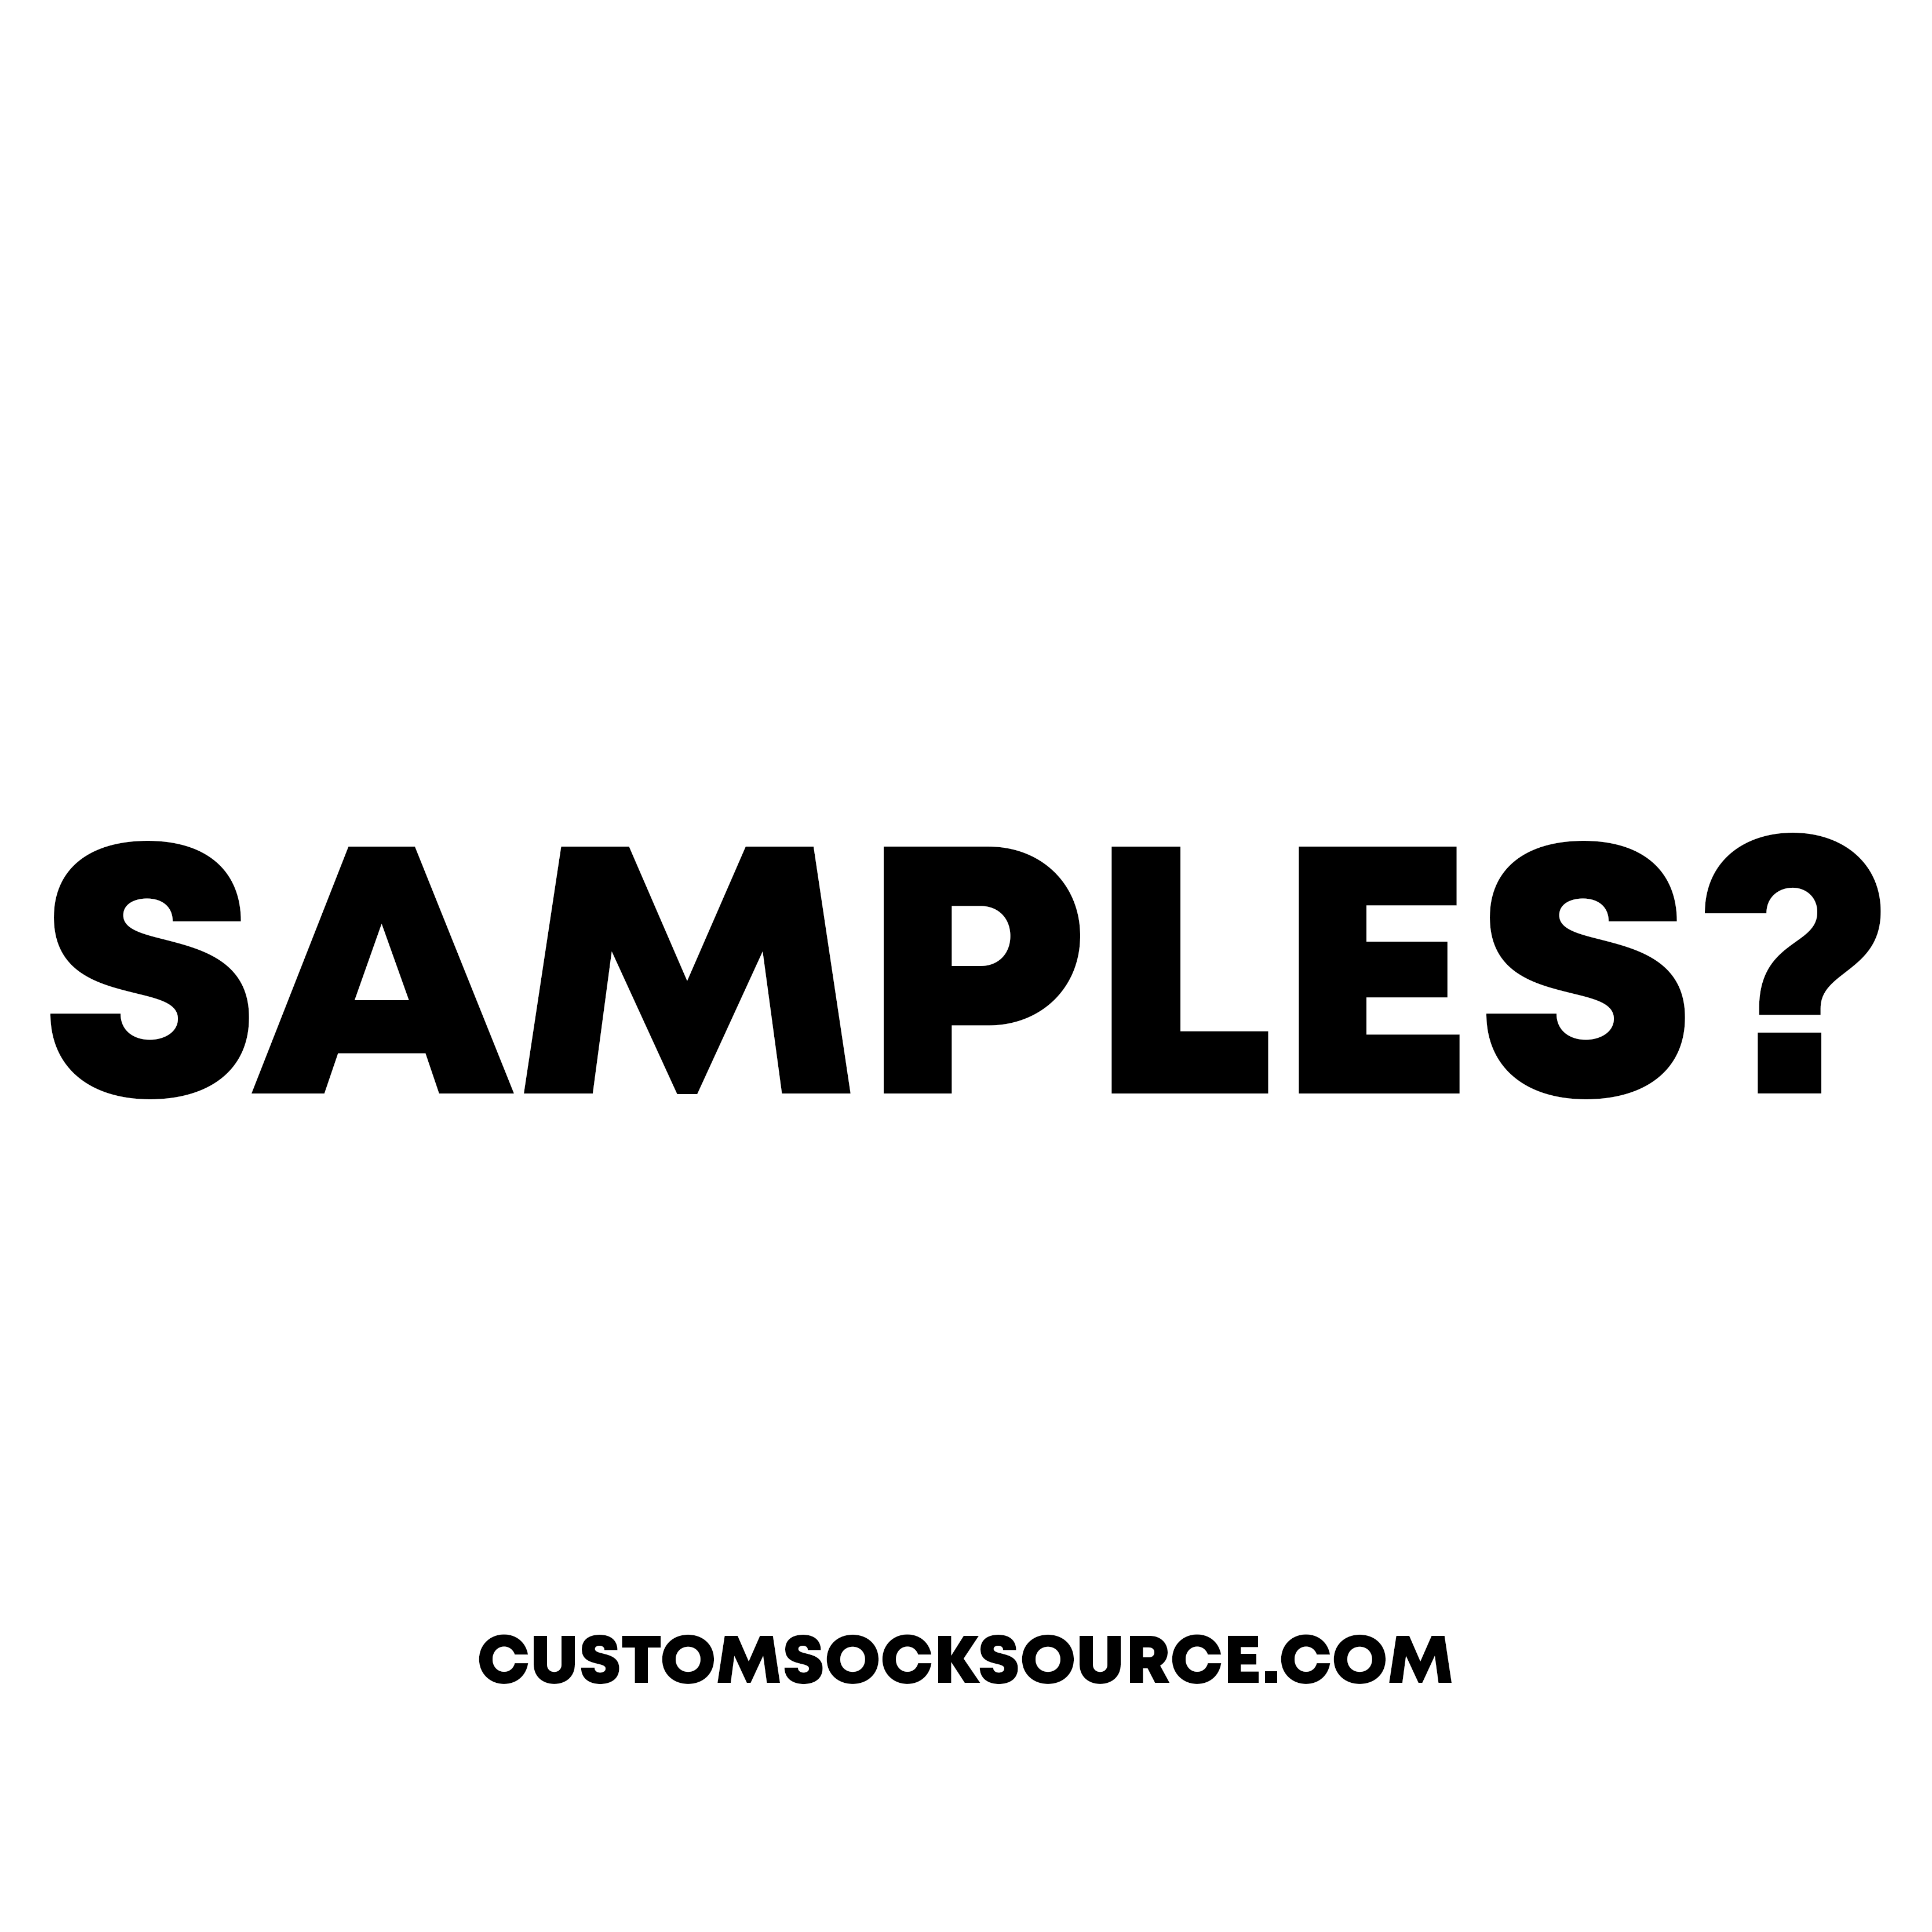 Do you need a physical sample?